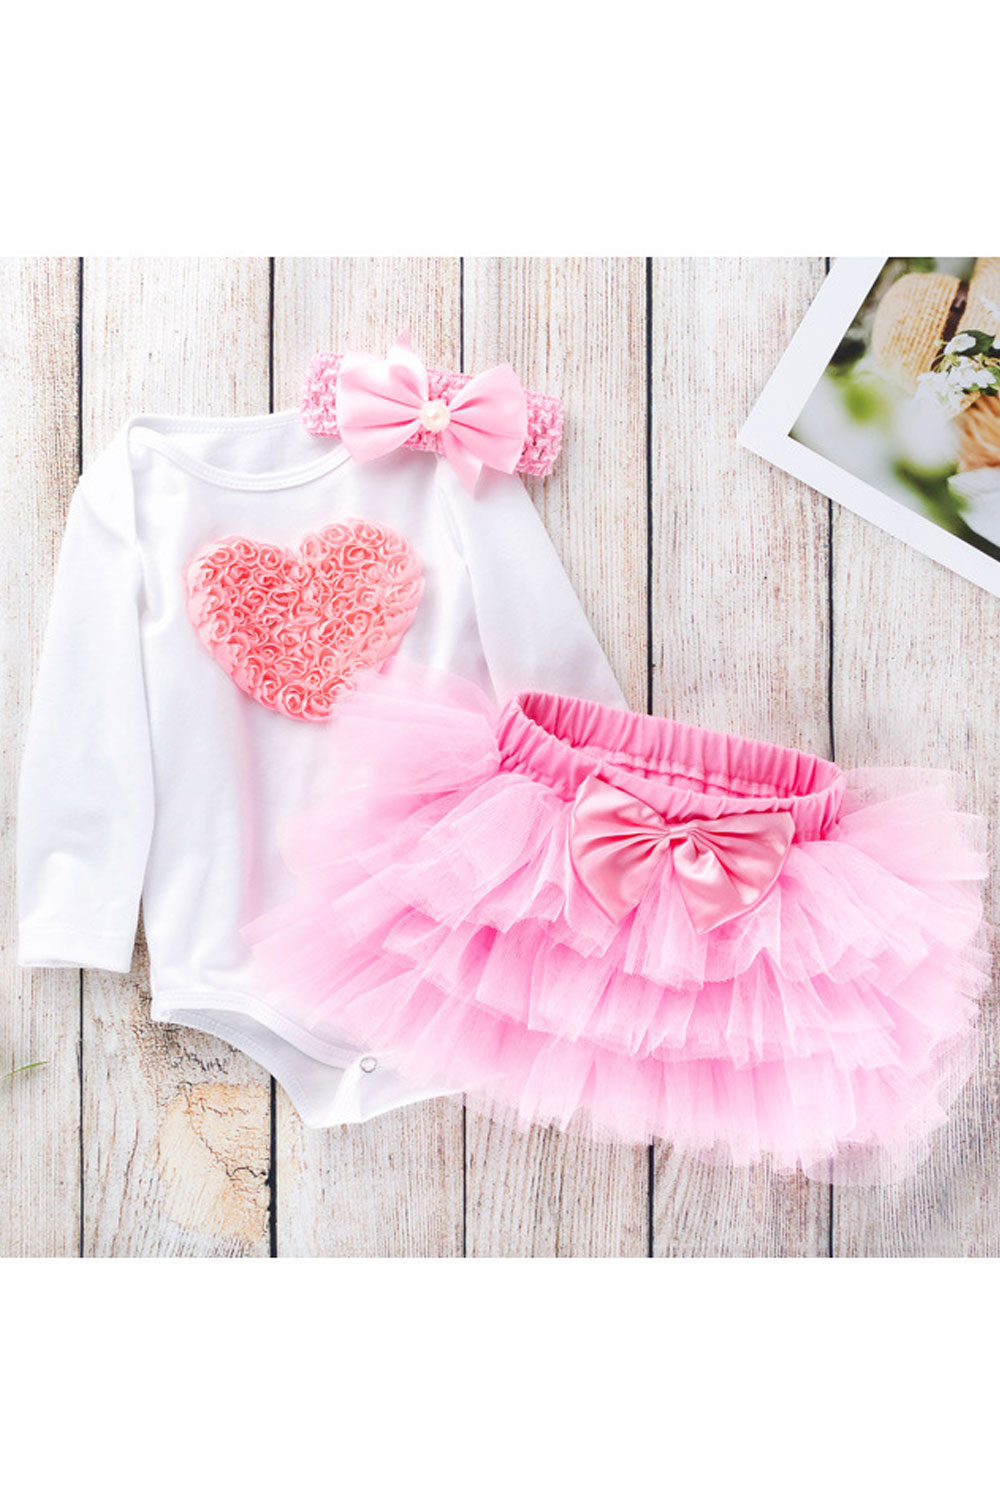 Tom Carry Baby Girls Long Sleeve Top Tutu Skirt Three Piece Outfit